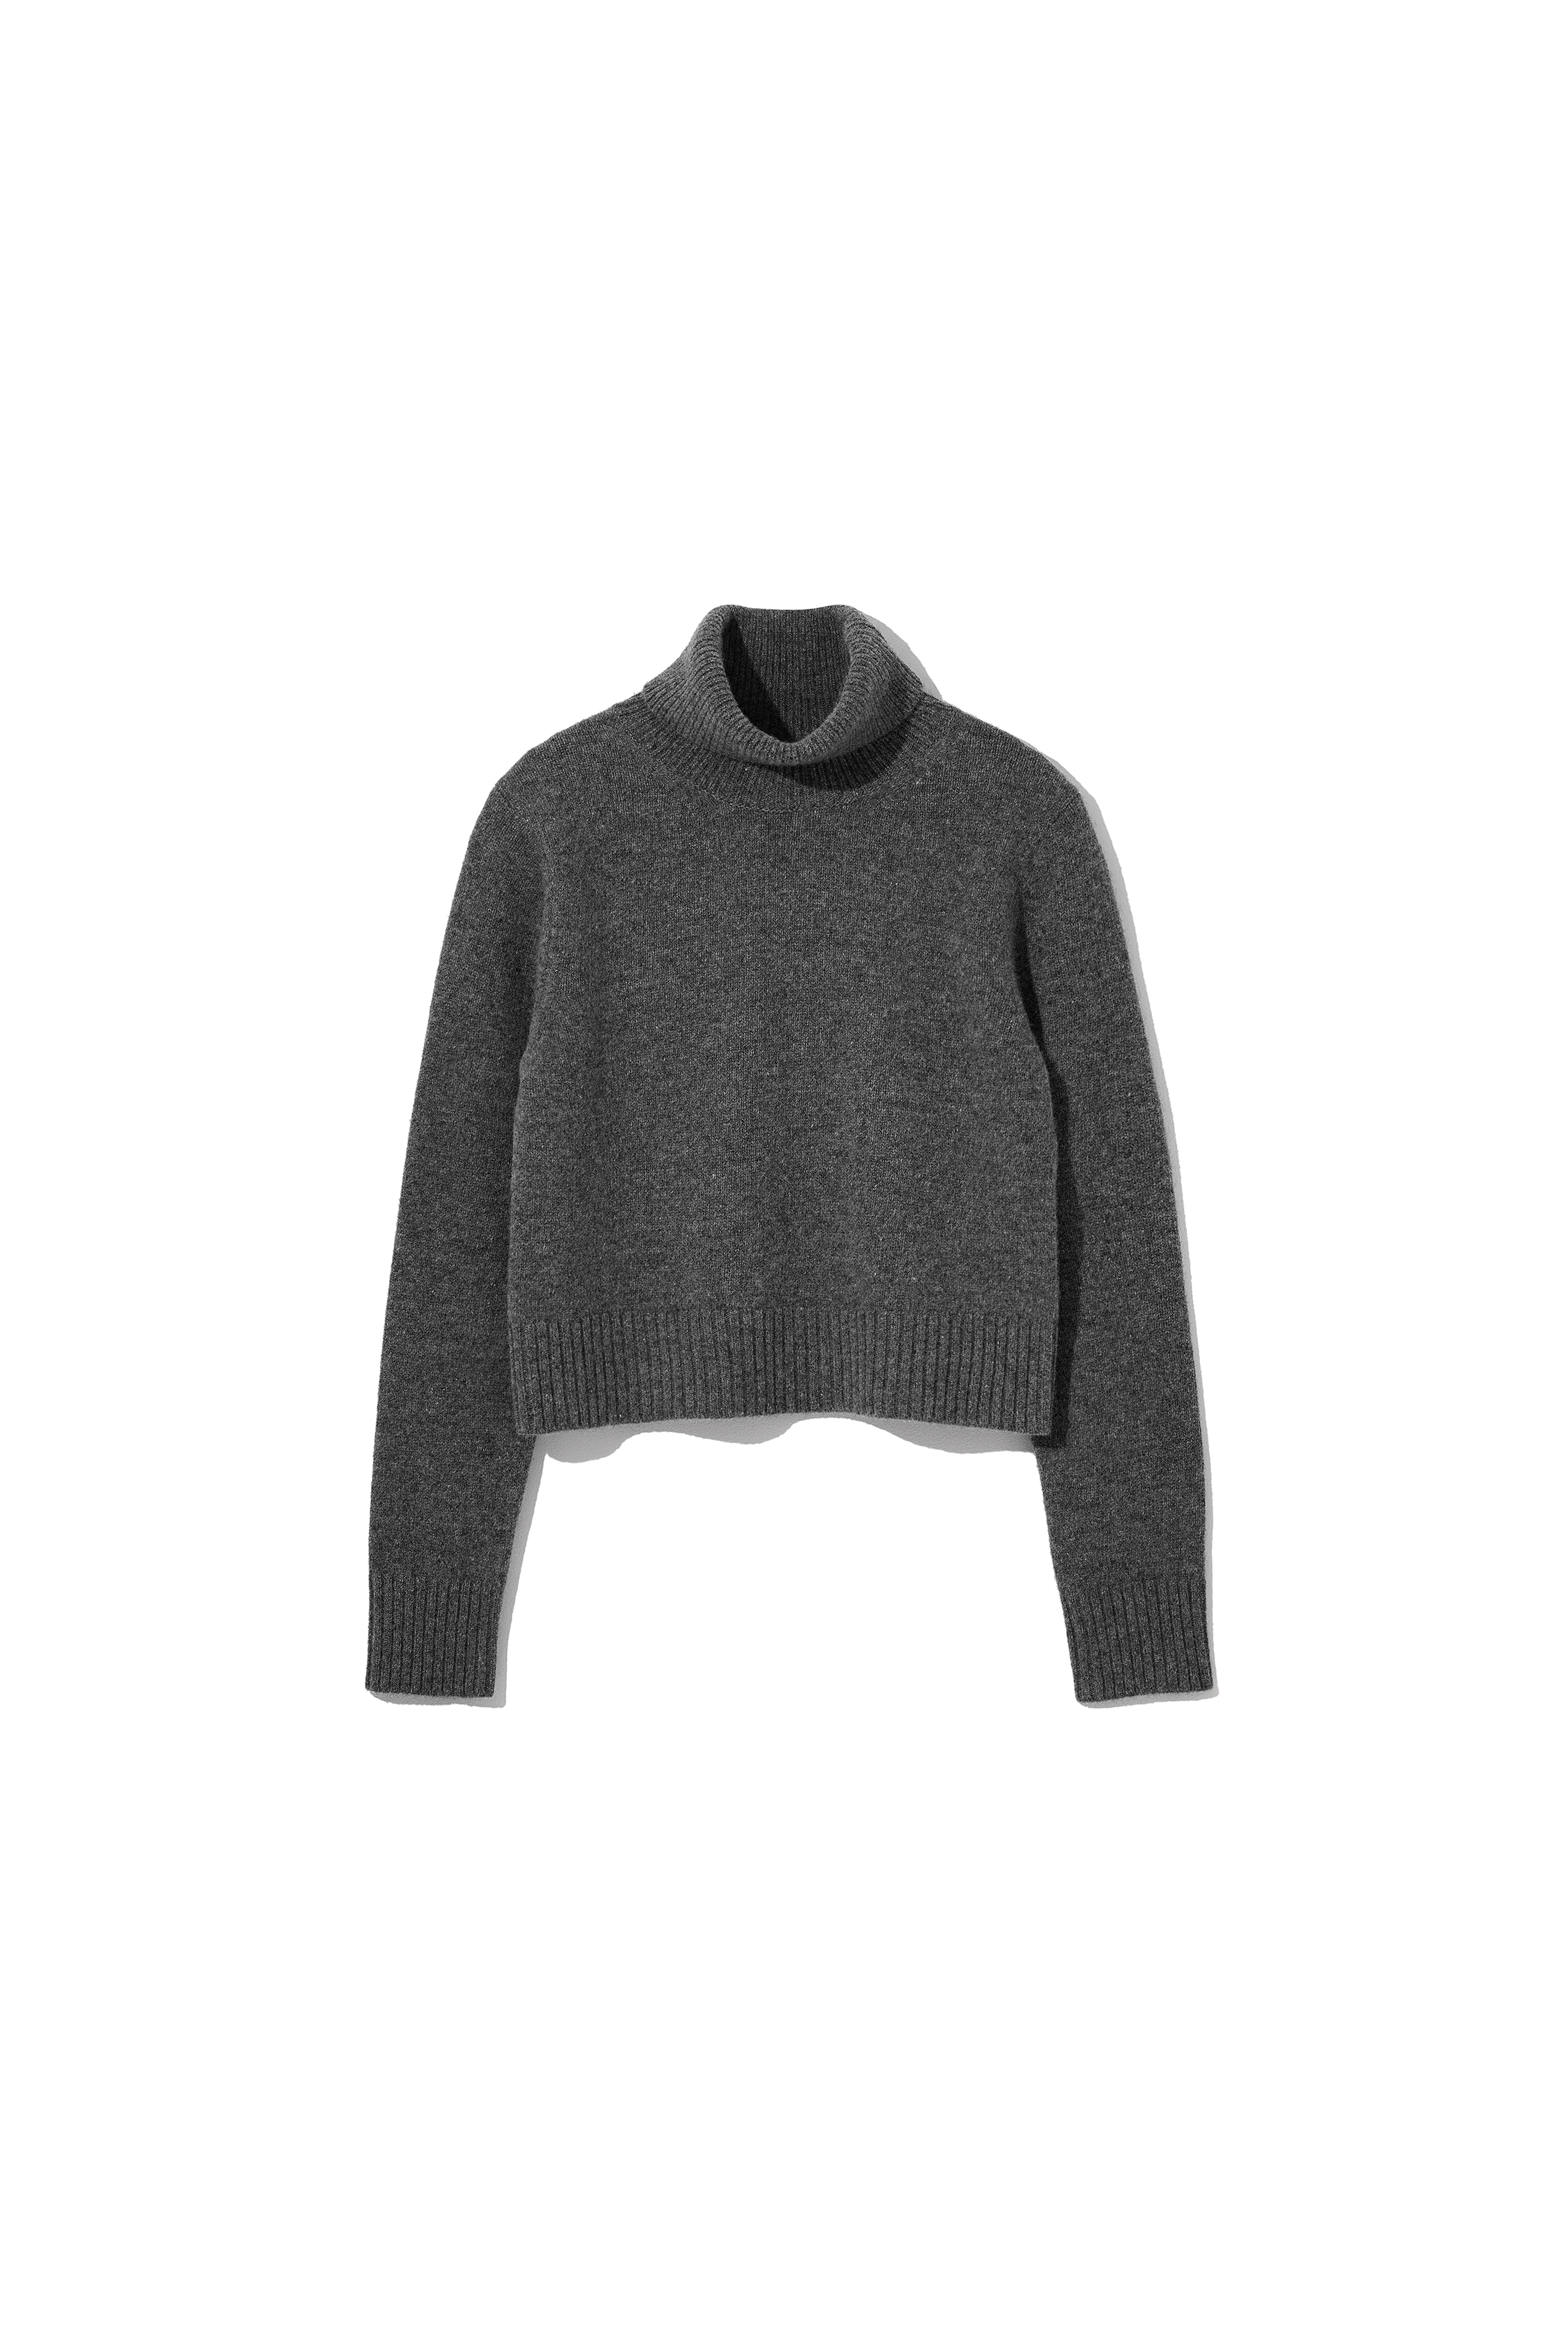 2nd) Cropped Turtle-Neck P/O M.Grey